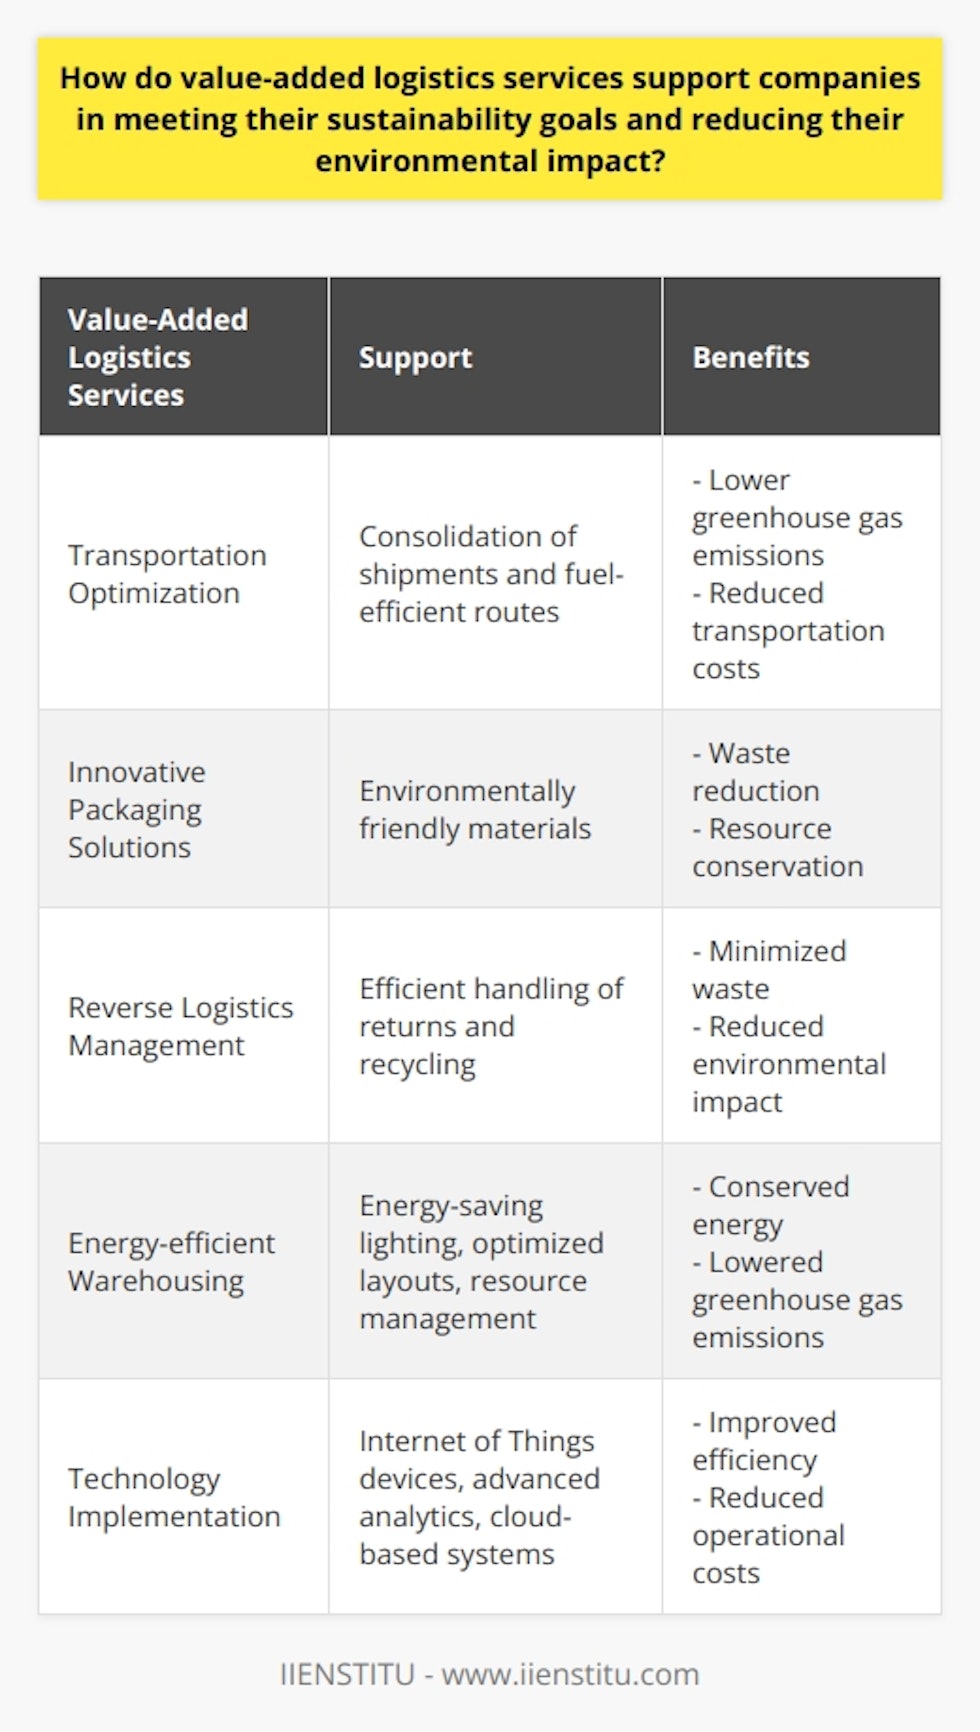 Value-added logistics services play a crucial role in supporting companies in achieving their sustainability goals and reducing their environmental impact. These services incorporate various practices and measures that enhance efficiency, reduce waste, and promote eco-friendly practices throughout the logistics process.One of the ways in which value-added logistics services support companies is through the optimization of transportation. By consolidating shipments and selecting the most direct and fuel-efficient routes, these services help businesses lower their greenhouse gas emissions and reduce their dependency on fossil fuels. This not only reduces environmental impact but also helps companies save on transportation costs.In addition, value-added logistics services offer innovative packaging solutions that contribute to meeting sustainability objectives. Environmentally friendly packaging innovations, such as lightweight and reusable materials, help reduce waste and conserve resources during the transportation process. These packaging solutions promote sustainable practices and minimize the environmental impact of packaging materials.Reverse logistics management is another essential component of eco-friendly supply chains, and value-added logistics services help integrate these practices into their operations. This involves efficient handling of returns, recycling, and proper disposal of products or packaging. By incorporating reverse logistics management, these services minimize waste and the ecological impact of returned items, contributing to sustainable practices.Energy-efficient warehousing is also a key aspect where value-added logistics services can support companies in reducing their environmental footprint. By implementing energy-saving lighting systems, optimizing warehouse layouts, and adopting resource management procedures, these services aid in conserving energy and reducing greenhouse gas emissions. This not only benefits the environment but also helps companies reduce their energy consumption and lower operational costs.Moreover, value-added logistics services promote the implementation of technology in logistics processes. Technologies such as Internet of Things devices, advanced analytics, and cloud-based systems improve overall efficiency and reduce operational costs. By optimizing resource consumption and streamlining processes, these technological advancements contribute to the environmental sustainability objectives of businesses.In conclusion, value-added logistics services provide critical support to companies in achieving their sustainability goals and reducing their environmental impact. Through practices such as transportation optimization, innovative packaging solutions, reverse logistics management, energy-efficient warehousing, and technology implementation, these services help companies minimize waste, conserve resources, and reduce greenhouse gas emissions. By embracing these services, companies can enhance their brand reputation, reduce their ecological footprint, and contribute towards the global effort of combating climate change.